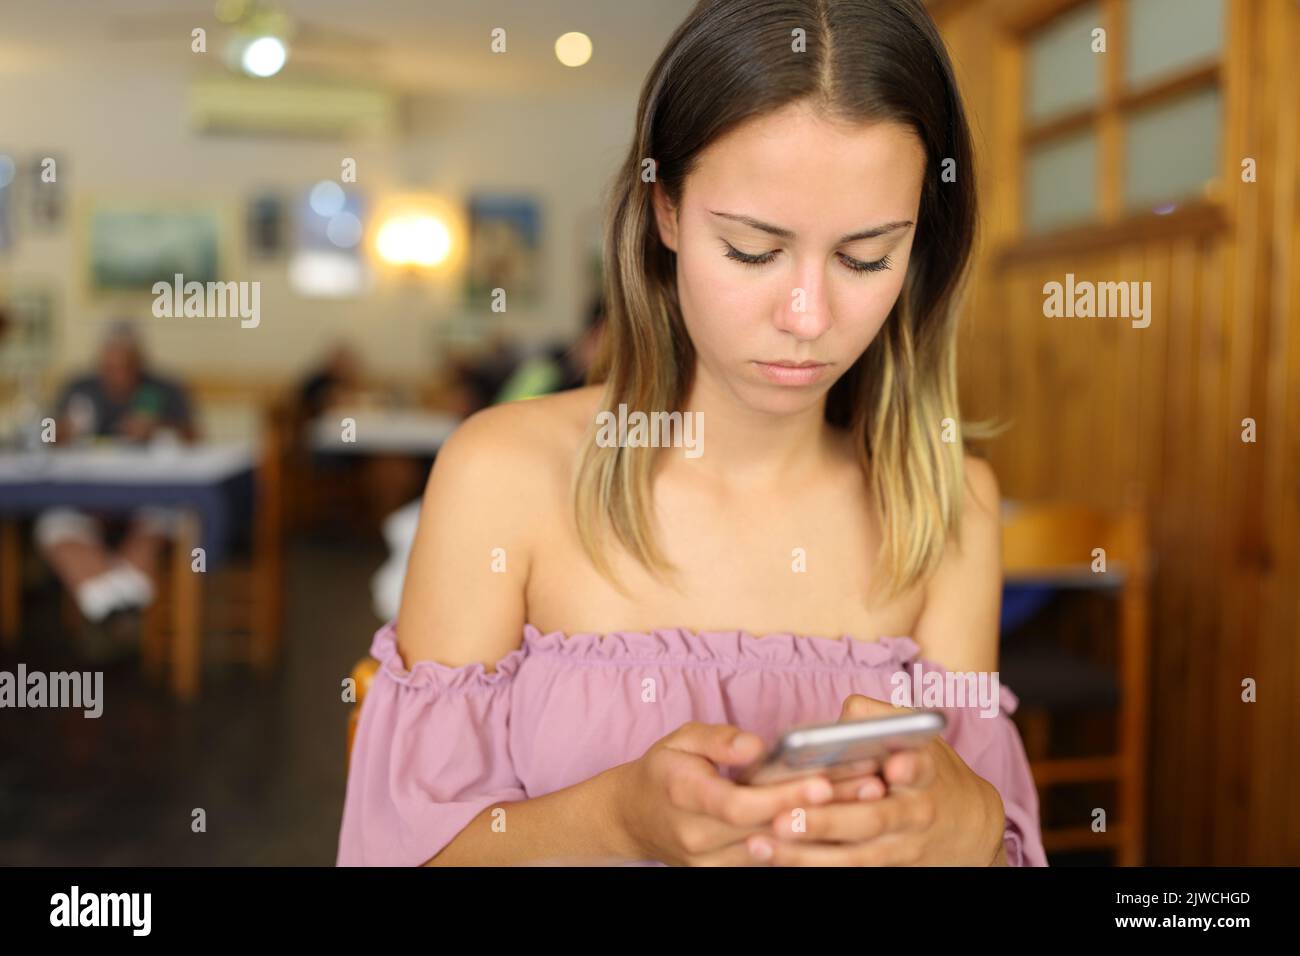 Concentrated woman in a restaurant using smart phone Stock Photo